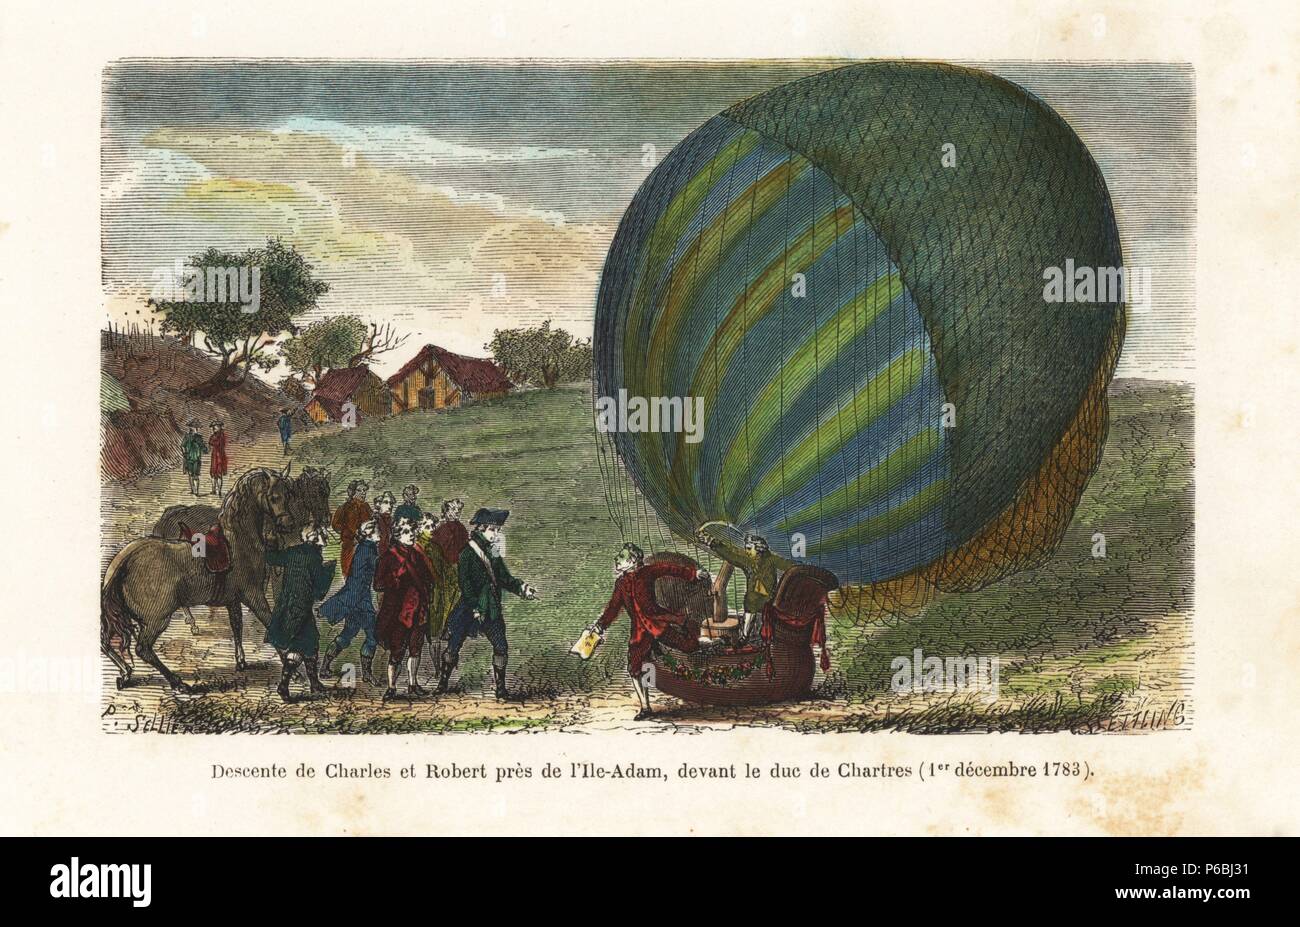 First manned hydrogen balloon flight of two hours and five minutes by Nicolas-Louis Robert and Professor Jacques Charles. The balloon descended in front of the Duc de Chartres, December 1st 1783. Handcolored engraving by J.J. Ettling and P. Sellier from Sircos and Pallier's 'Histoire des Ballons,' Roy, Paris, 1870. Stock Photo